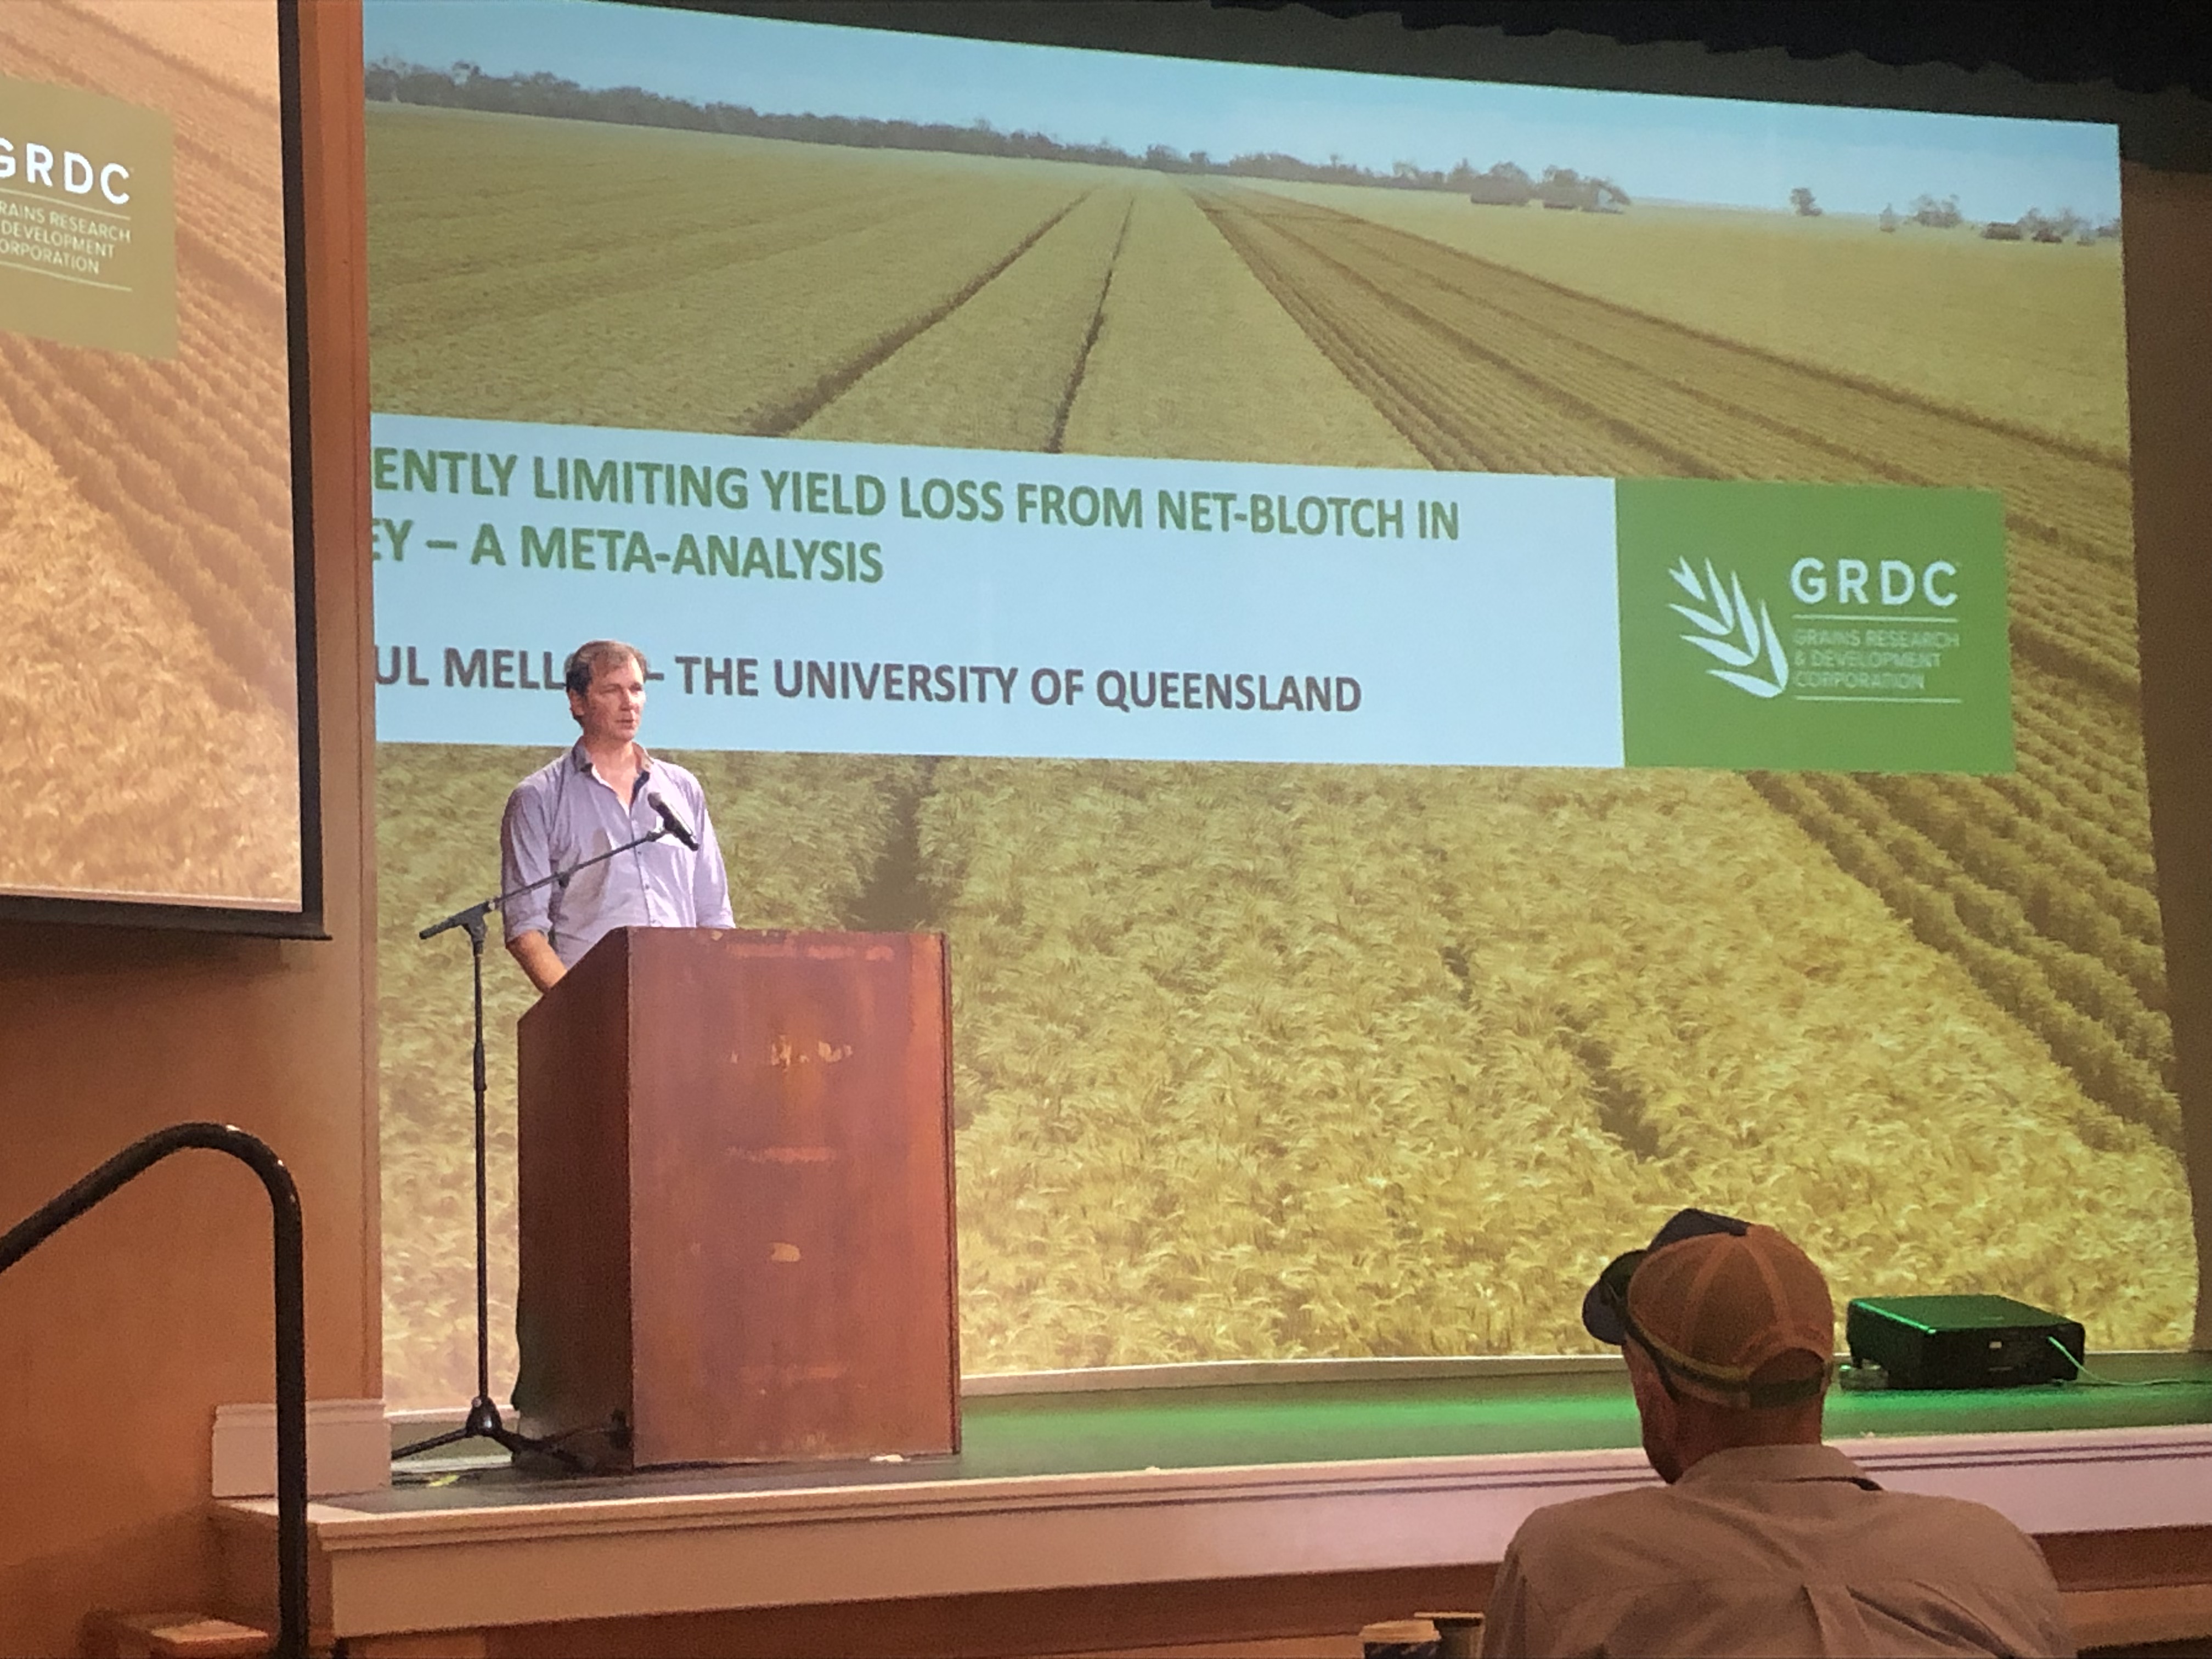 Presenting the findings from a meta-analysis of netblotch trials in barley at the Goodiwindi GRDC updates on 5th of March